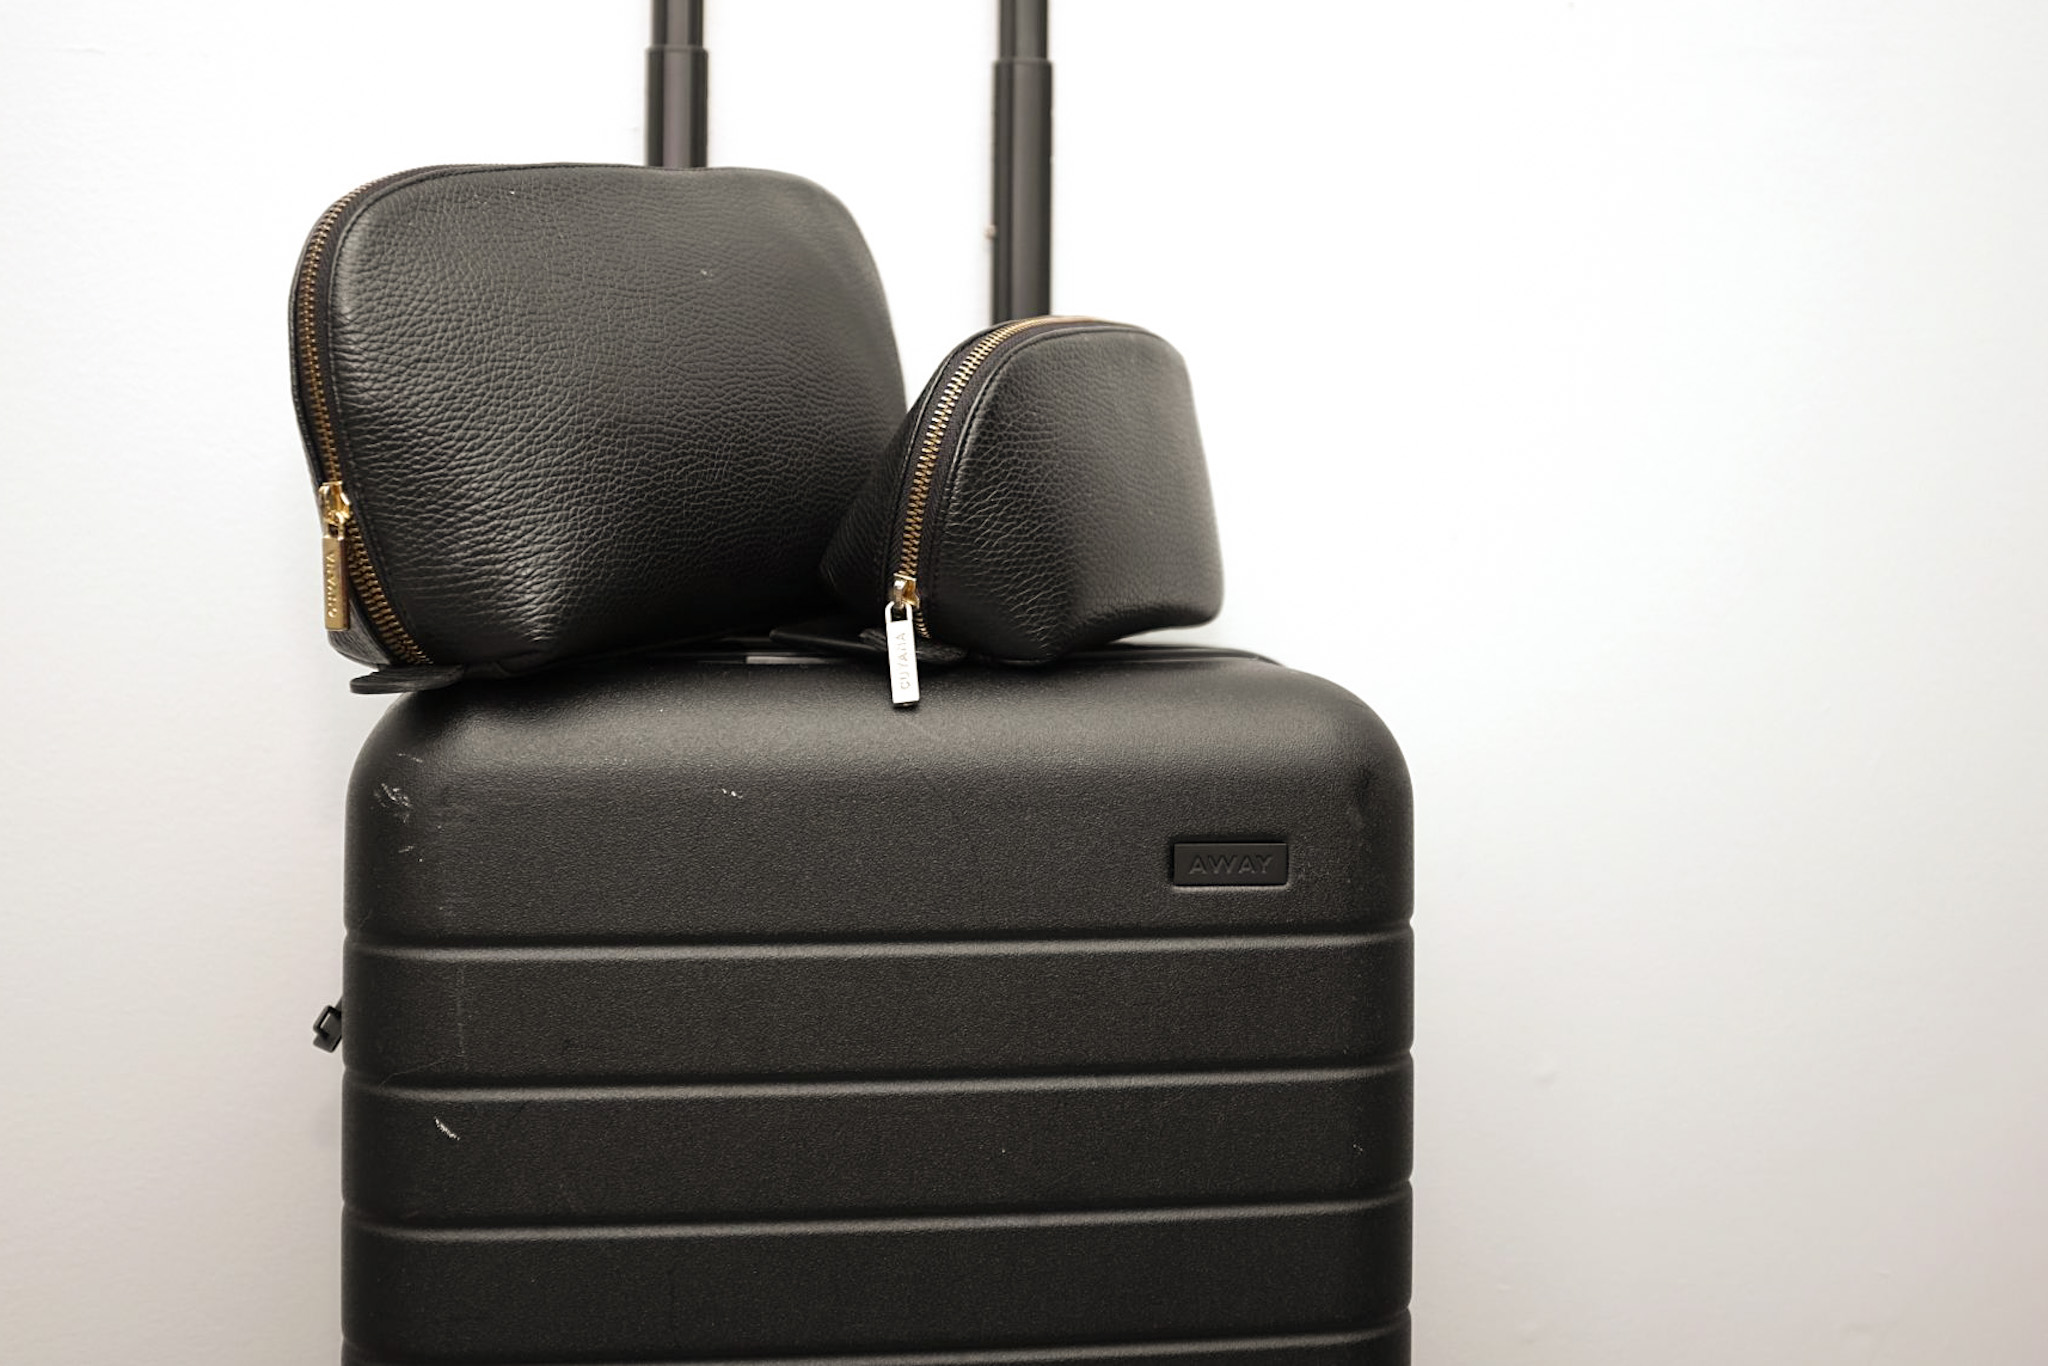 The Leather Travel Set sits on top of an Away suitcase